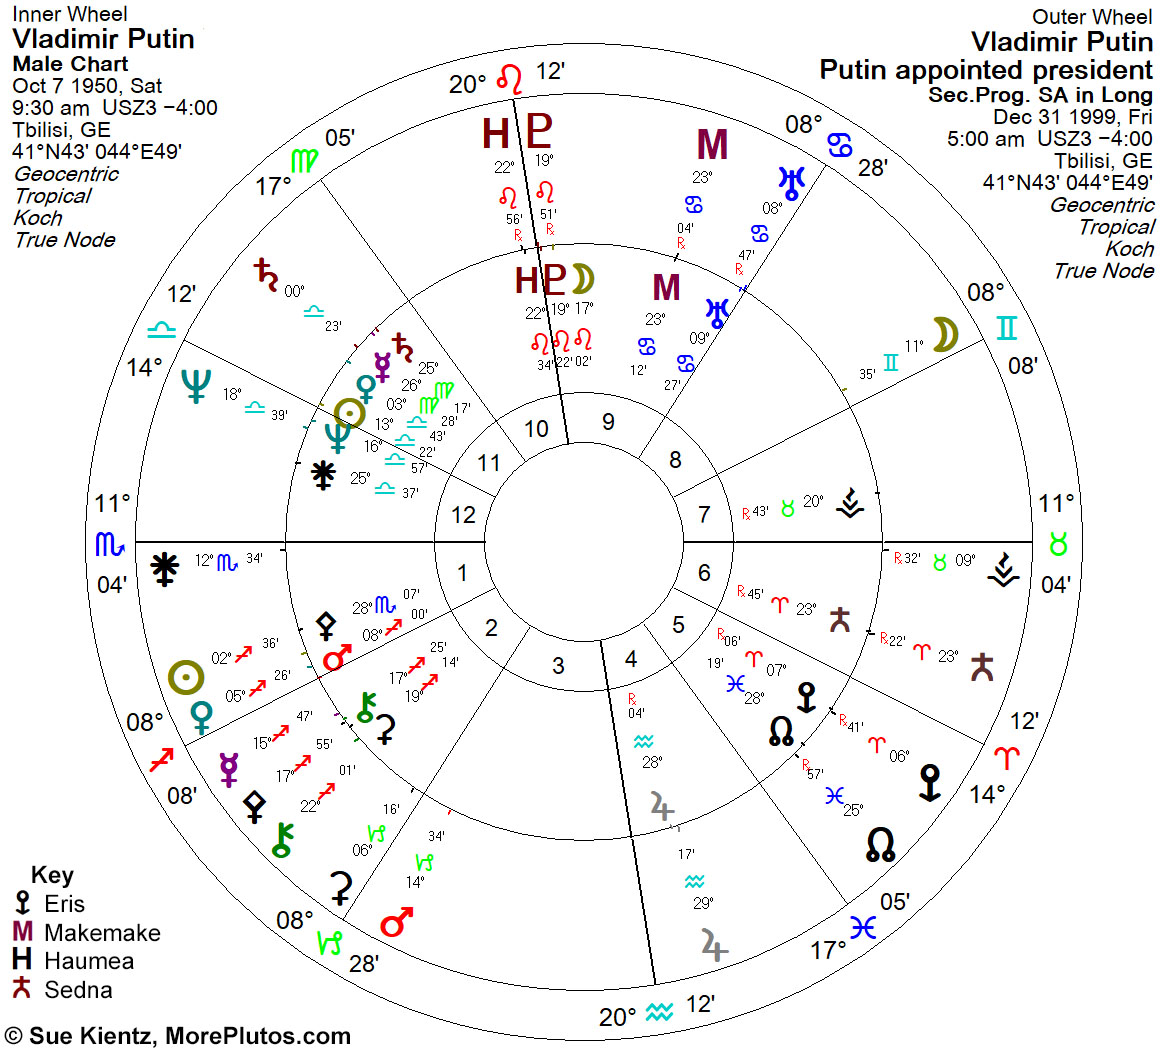 Biwheel chart showing Vladimir Putin natal (inner) and secondary progression to his appointment as president of Russia (outer)